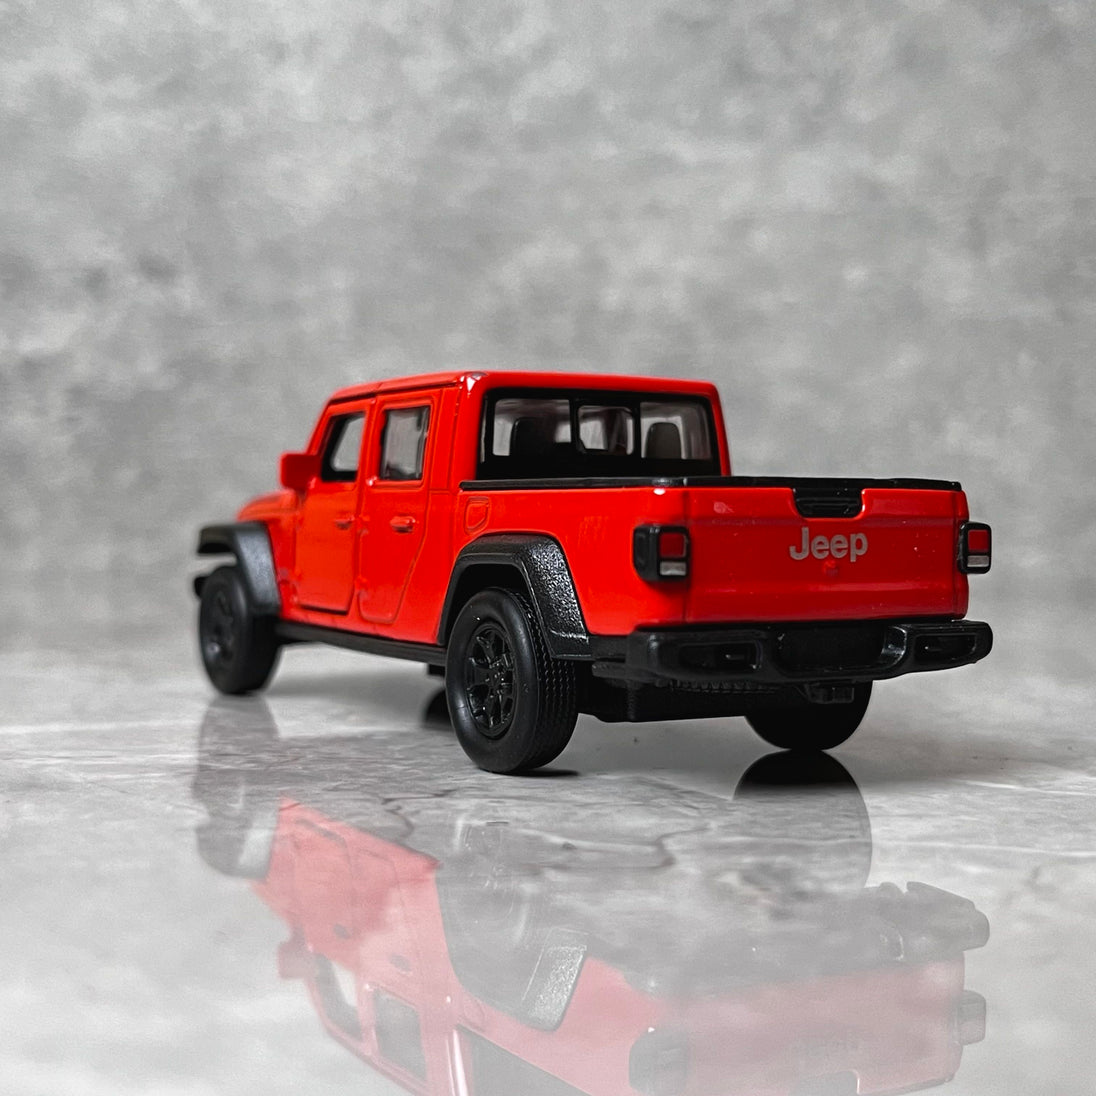 1:36 Jeep Gladiator Pickup Truck Diecast Car Model By Welly